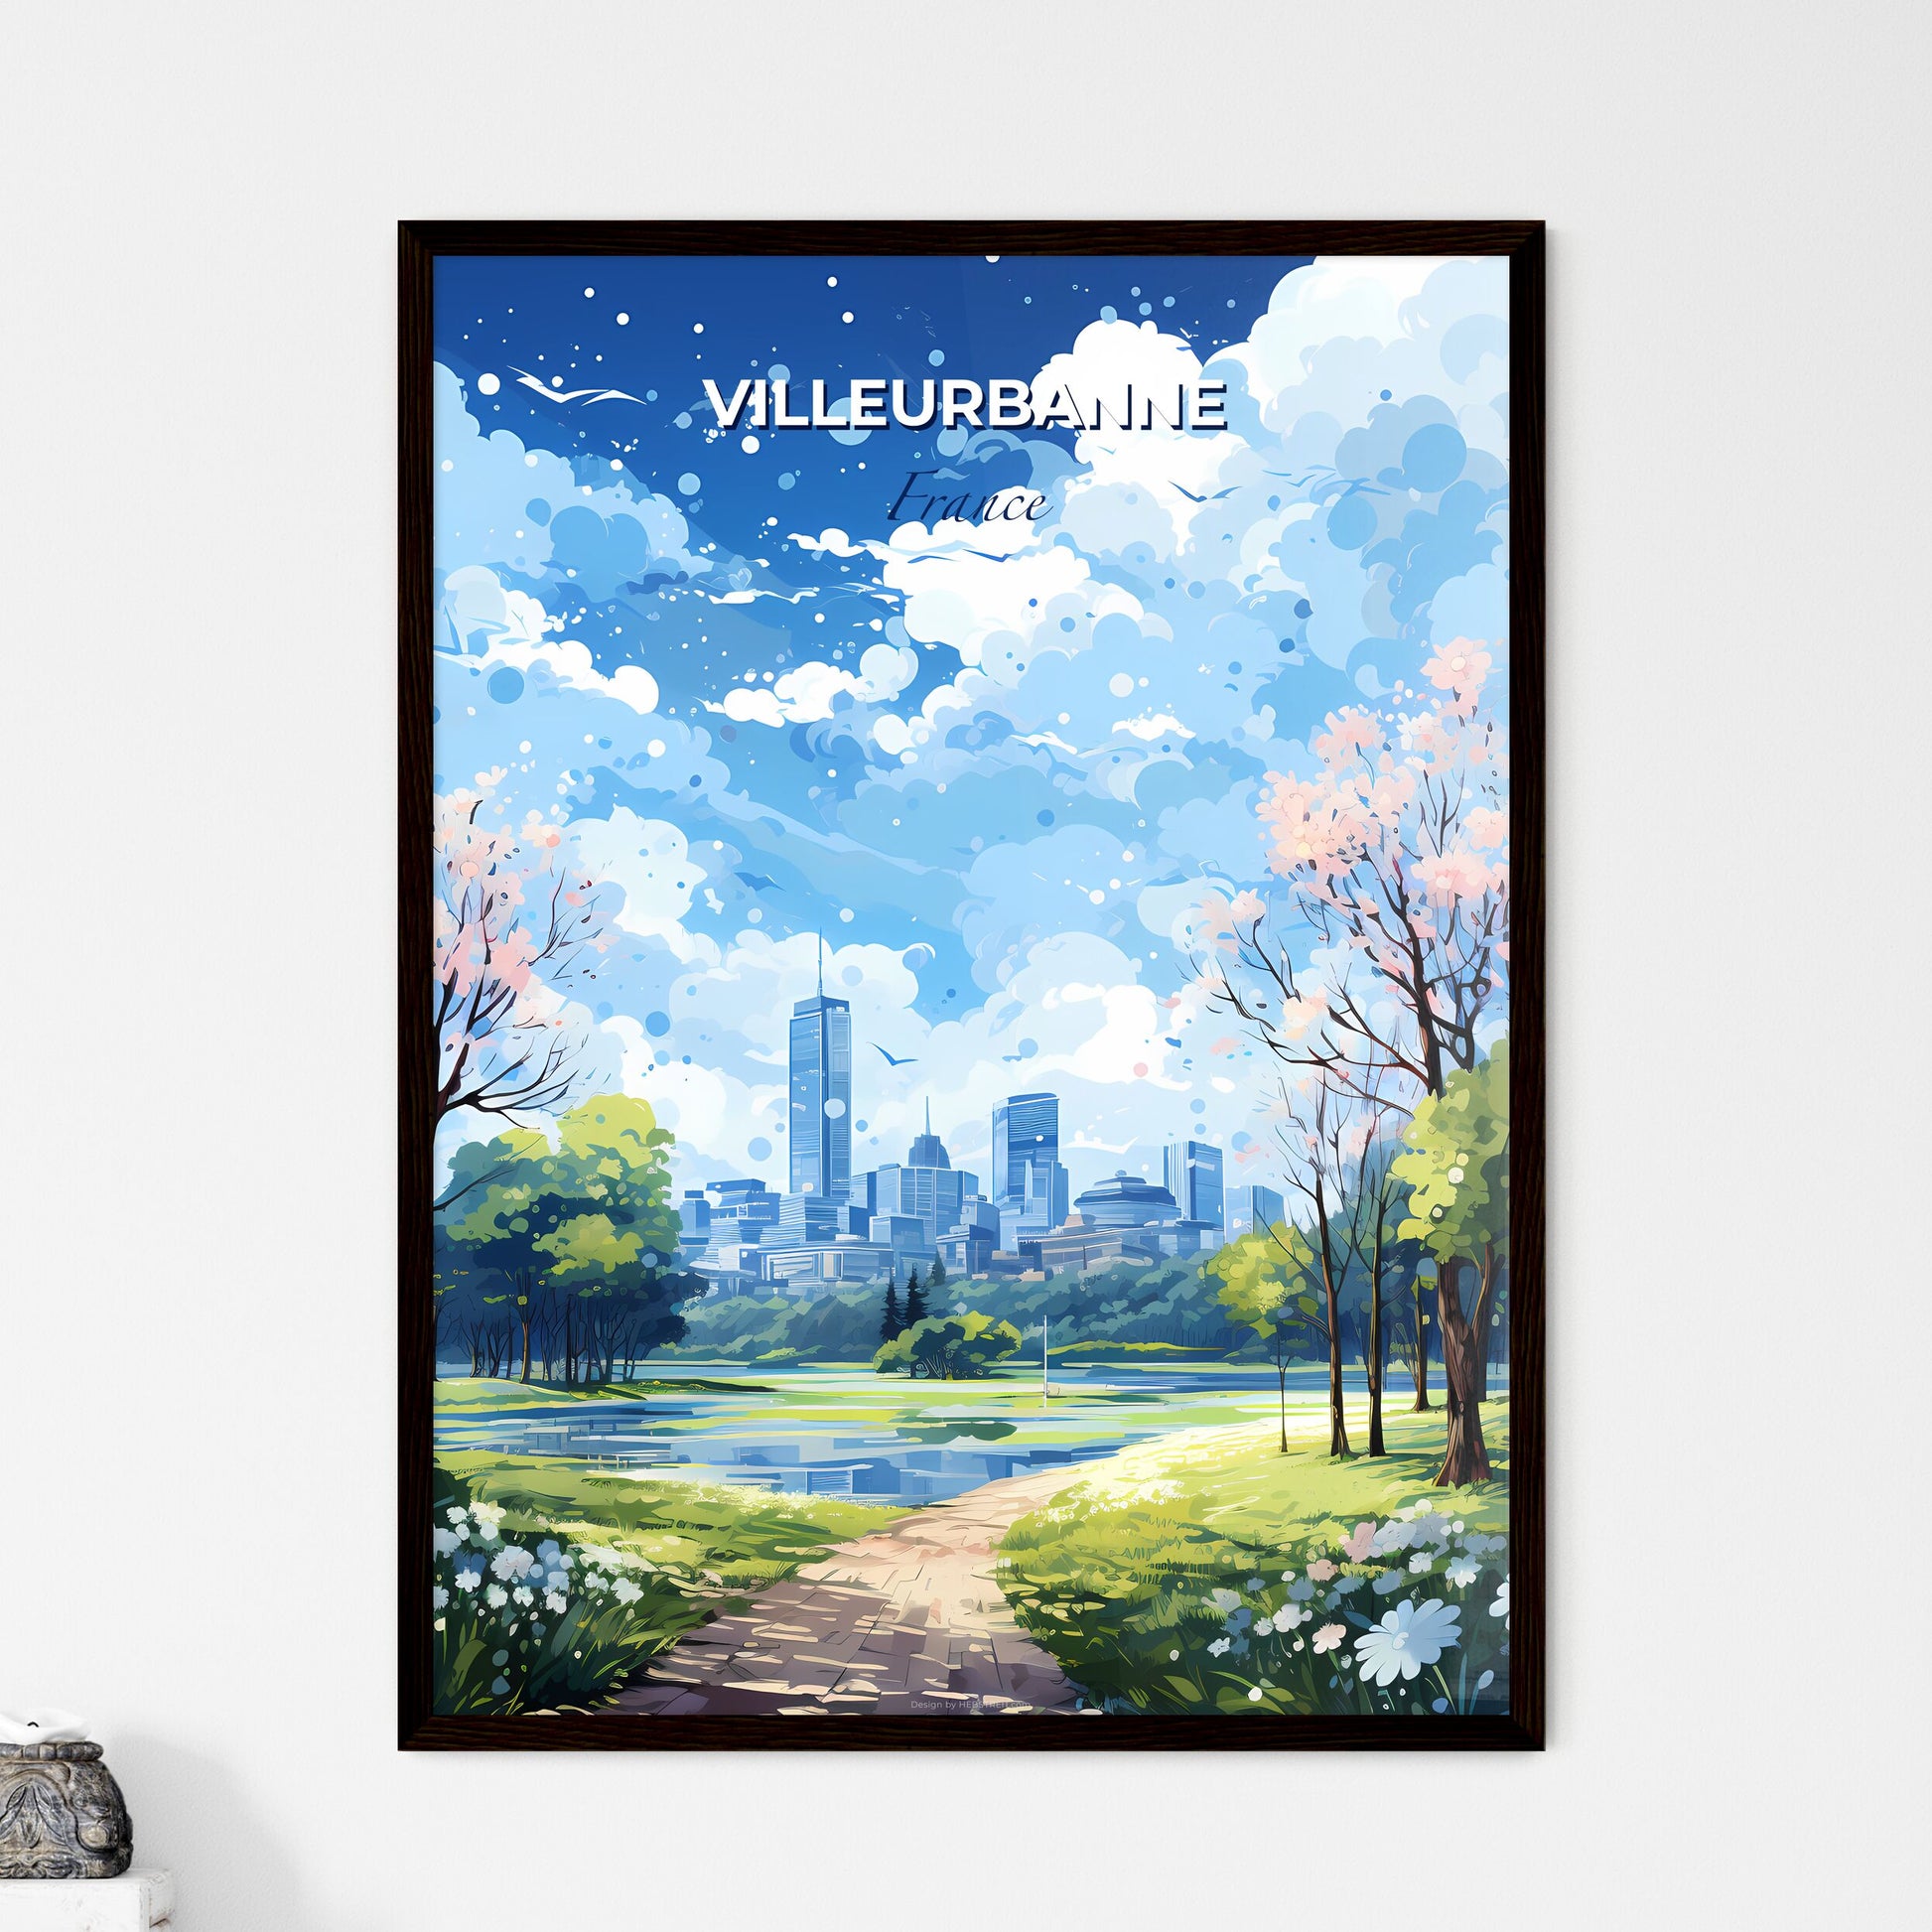 Villeurbanne France Skyline - A Landscape Of A Park With Trees And A City In The Background - Customizable Travel Gift Default Title